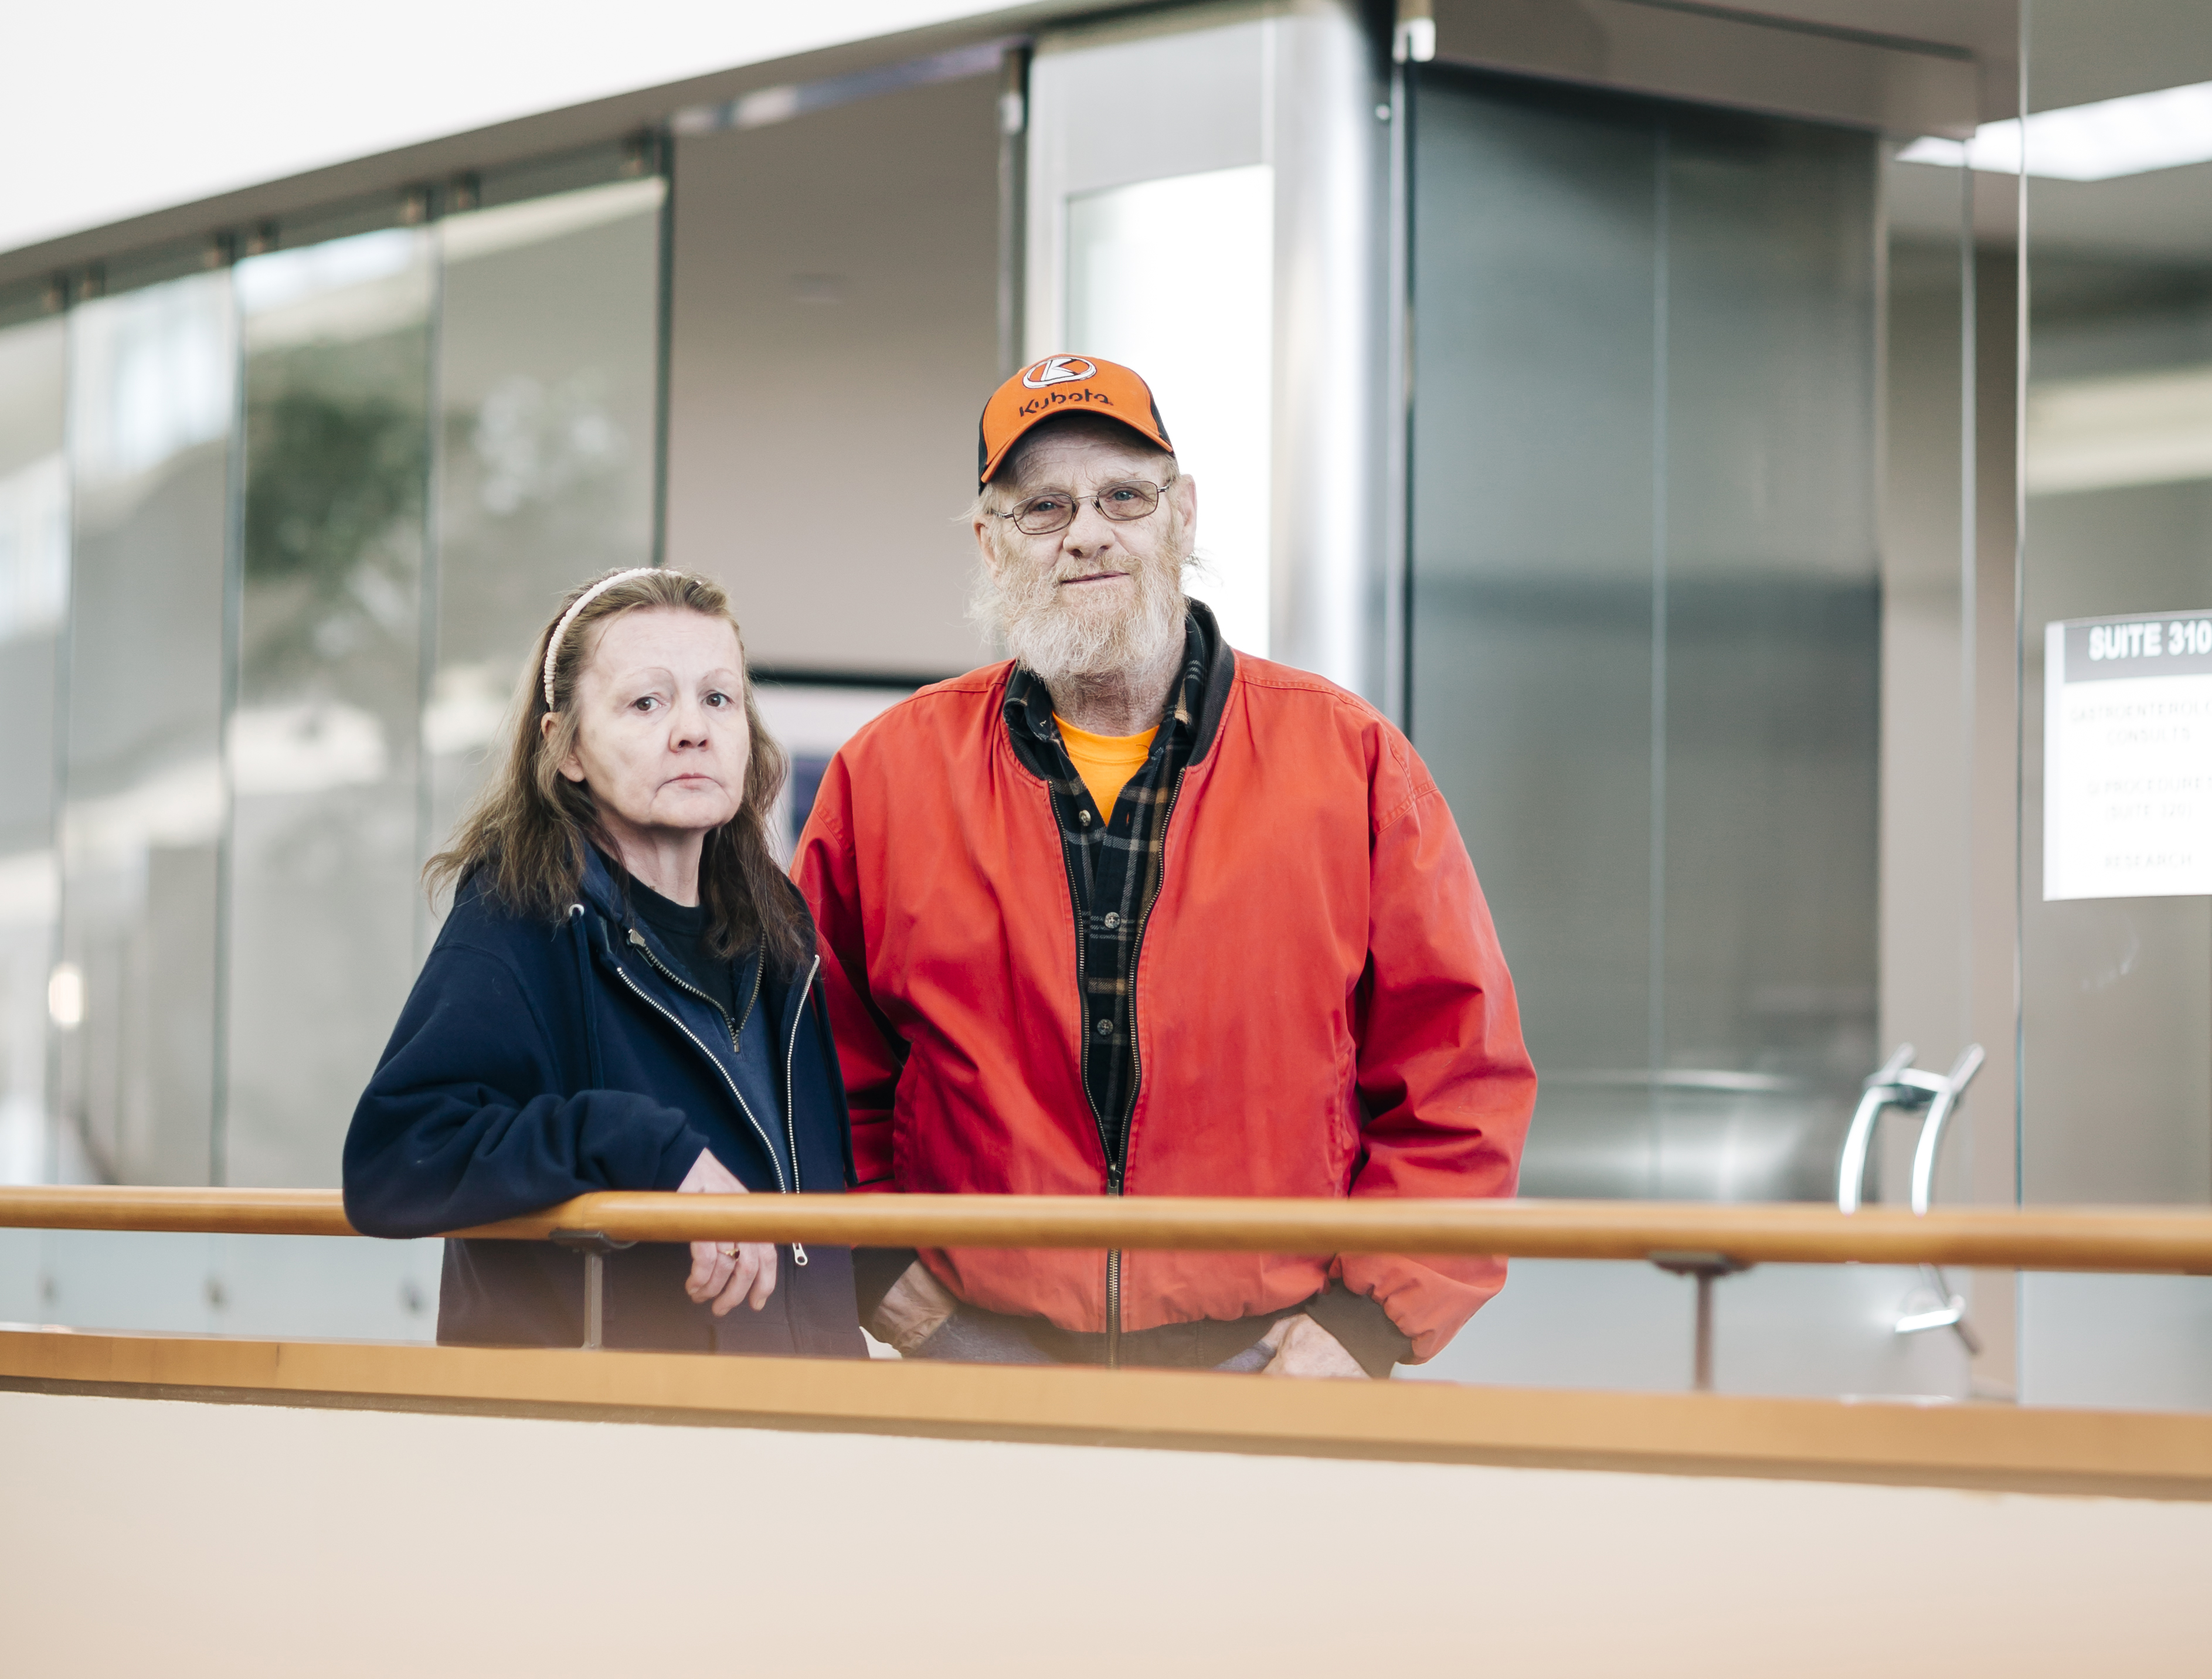 Debbie and Larry Moehnke of Washougal, Wash., faced bills of nearly $227,000, even after insurance, when she suffered a heart attack and spent a month at Portland’s Oregon Health &amp; Science University hospital last summer. (Michael Hanson for KHN)